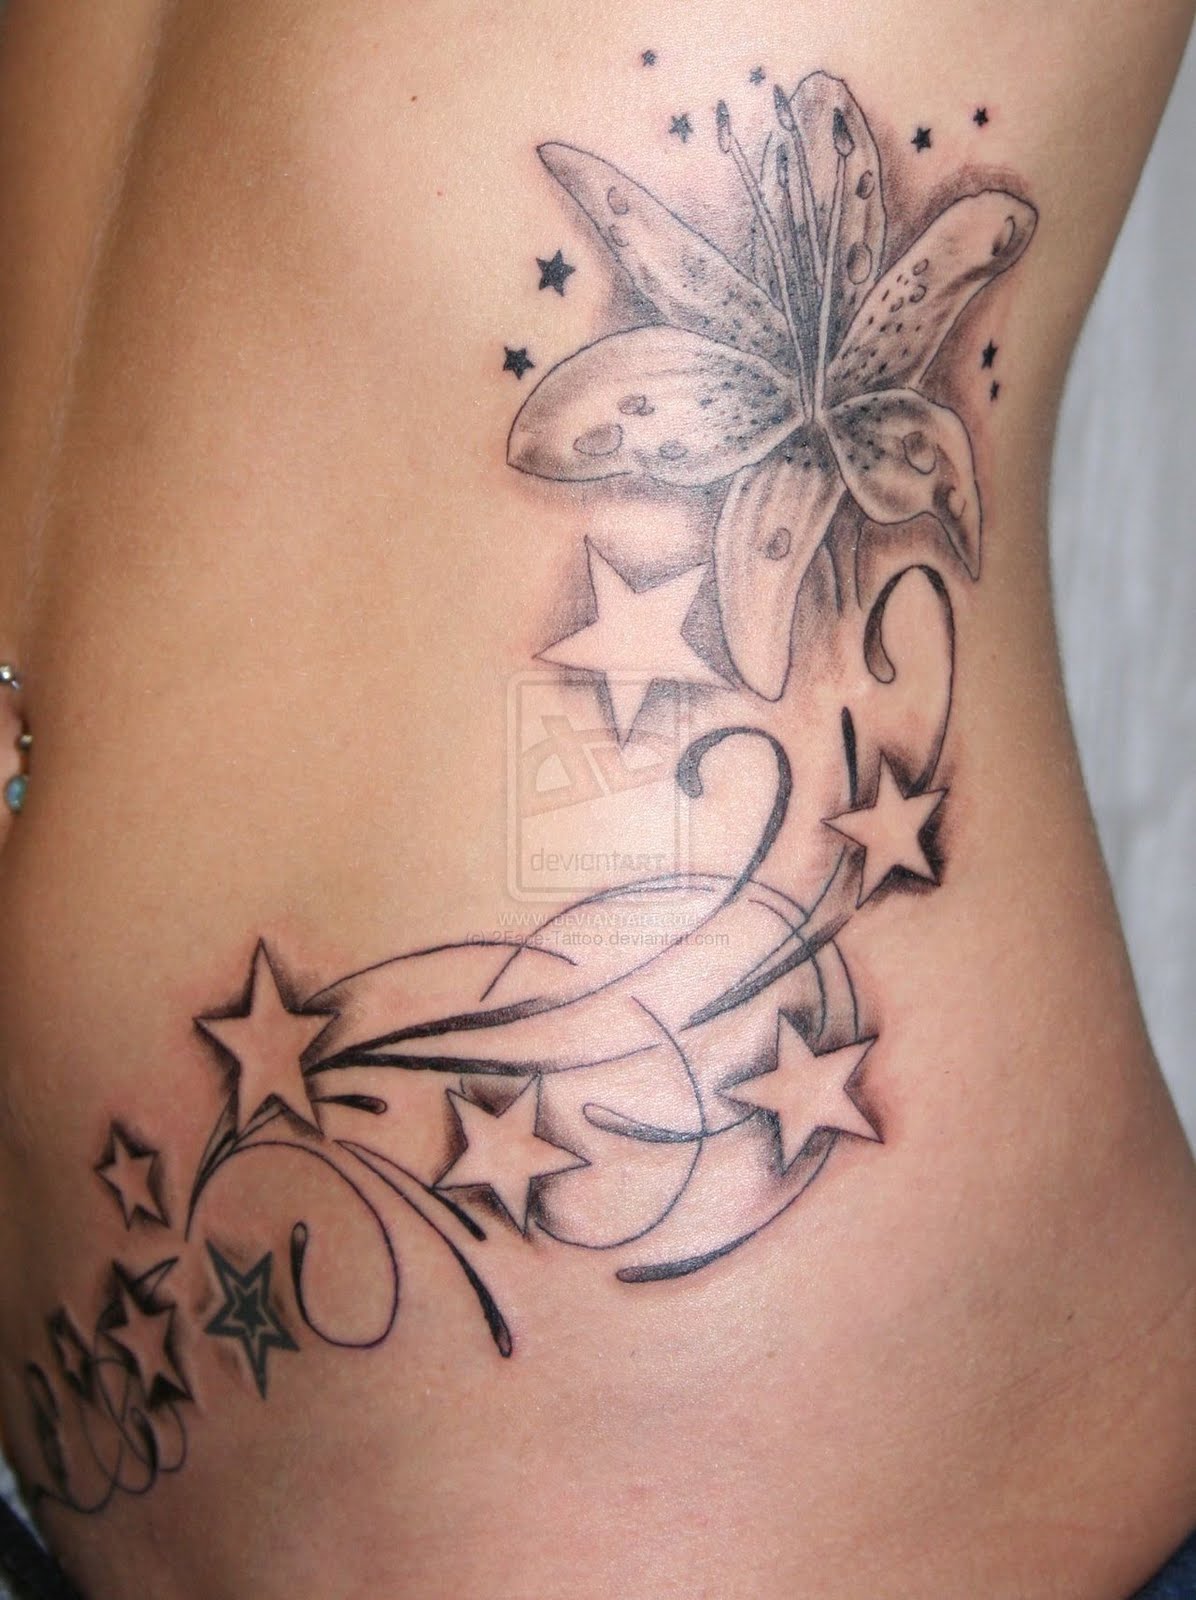 Cool Tattoos ~ Gallery Tattoo for 2012